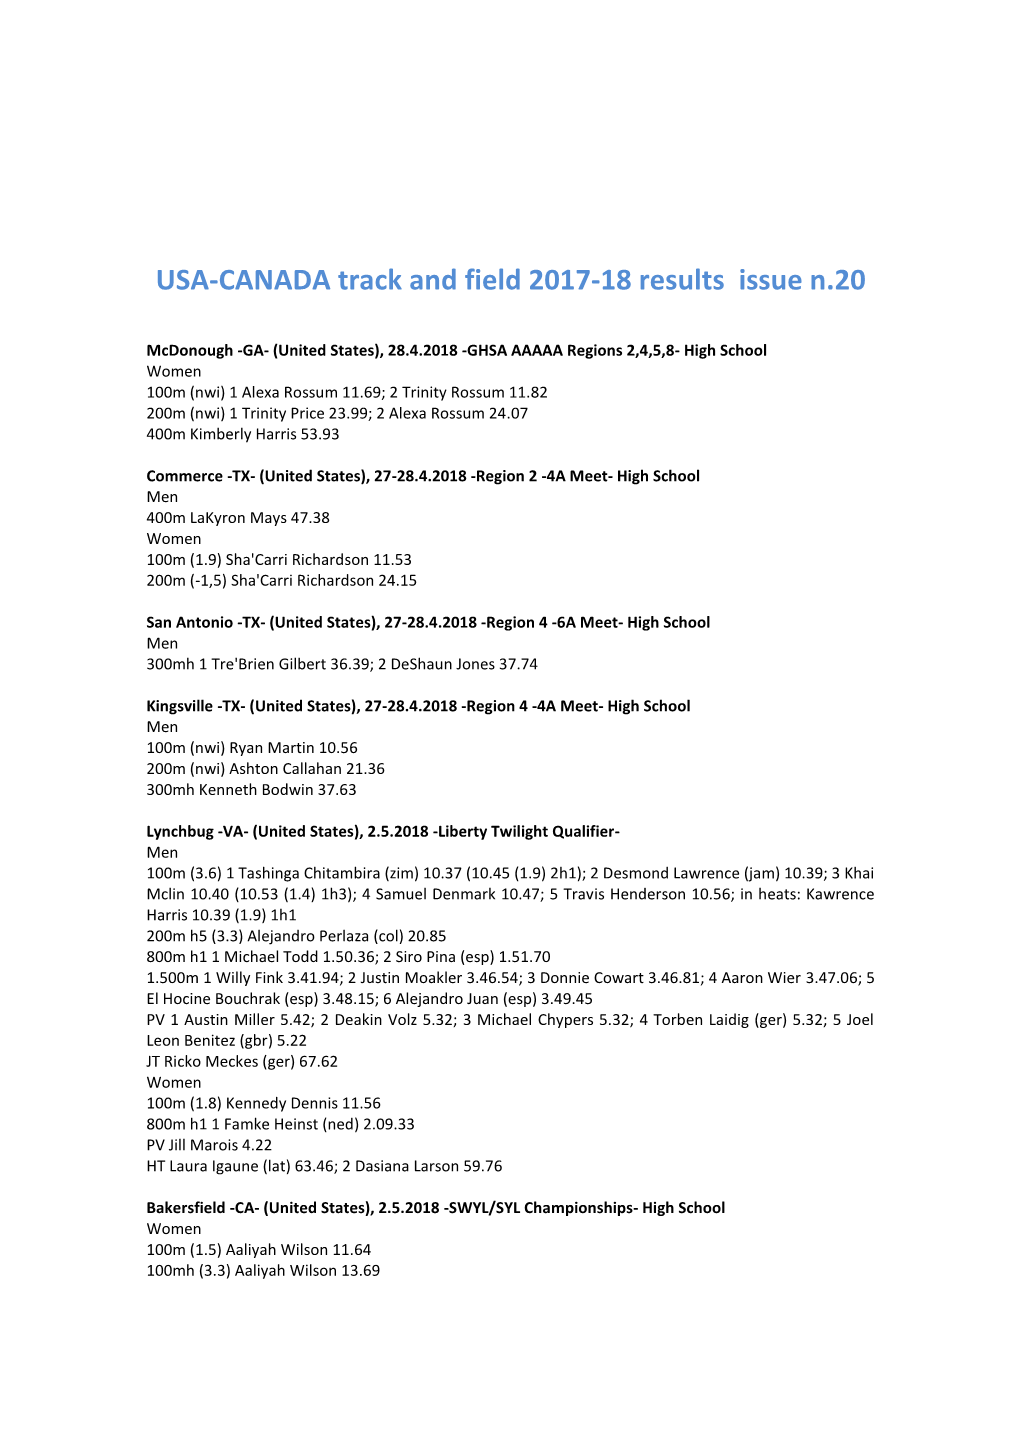 USA-CANADA Track and Field 2017-18 Results Issue N.20